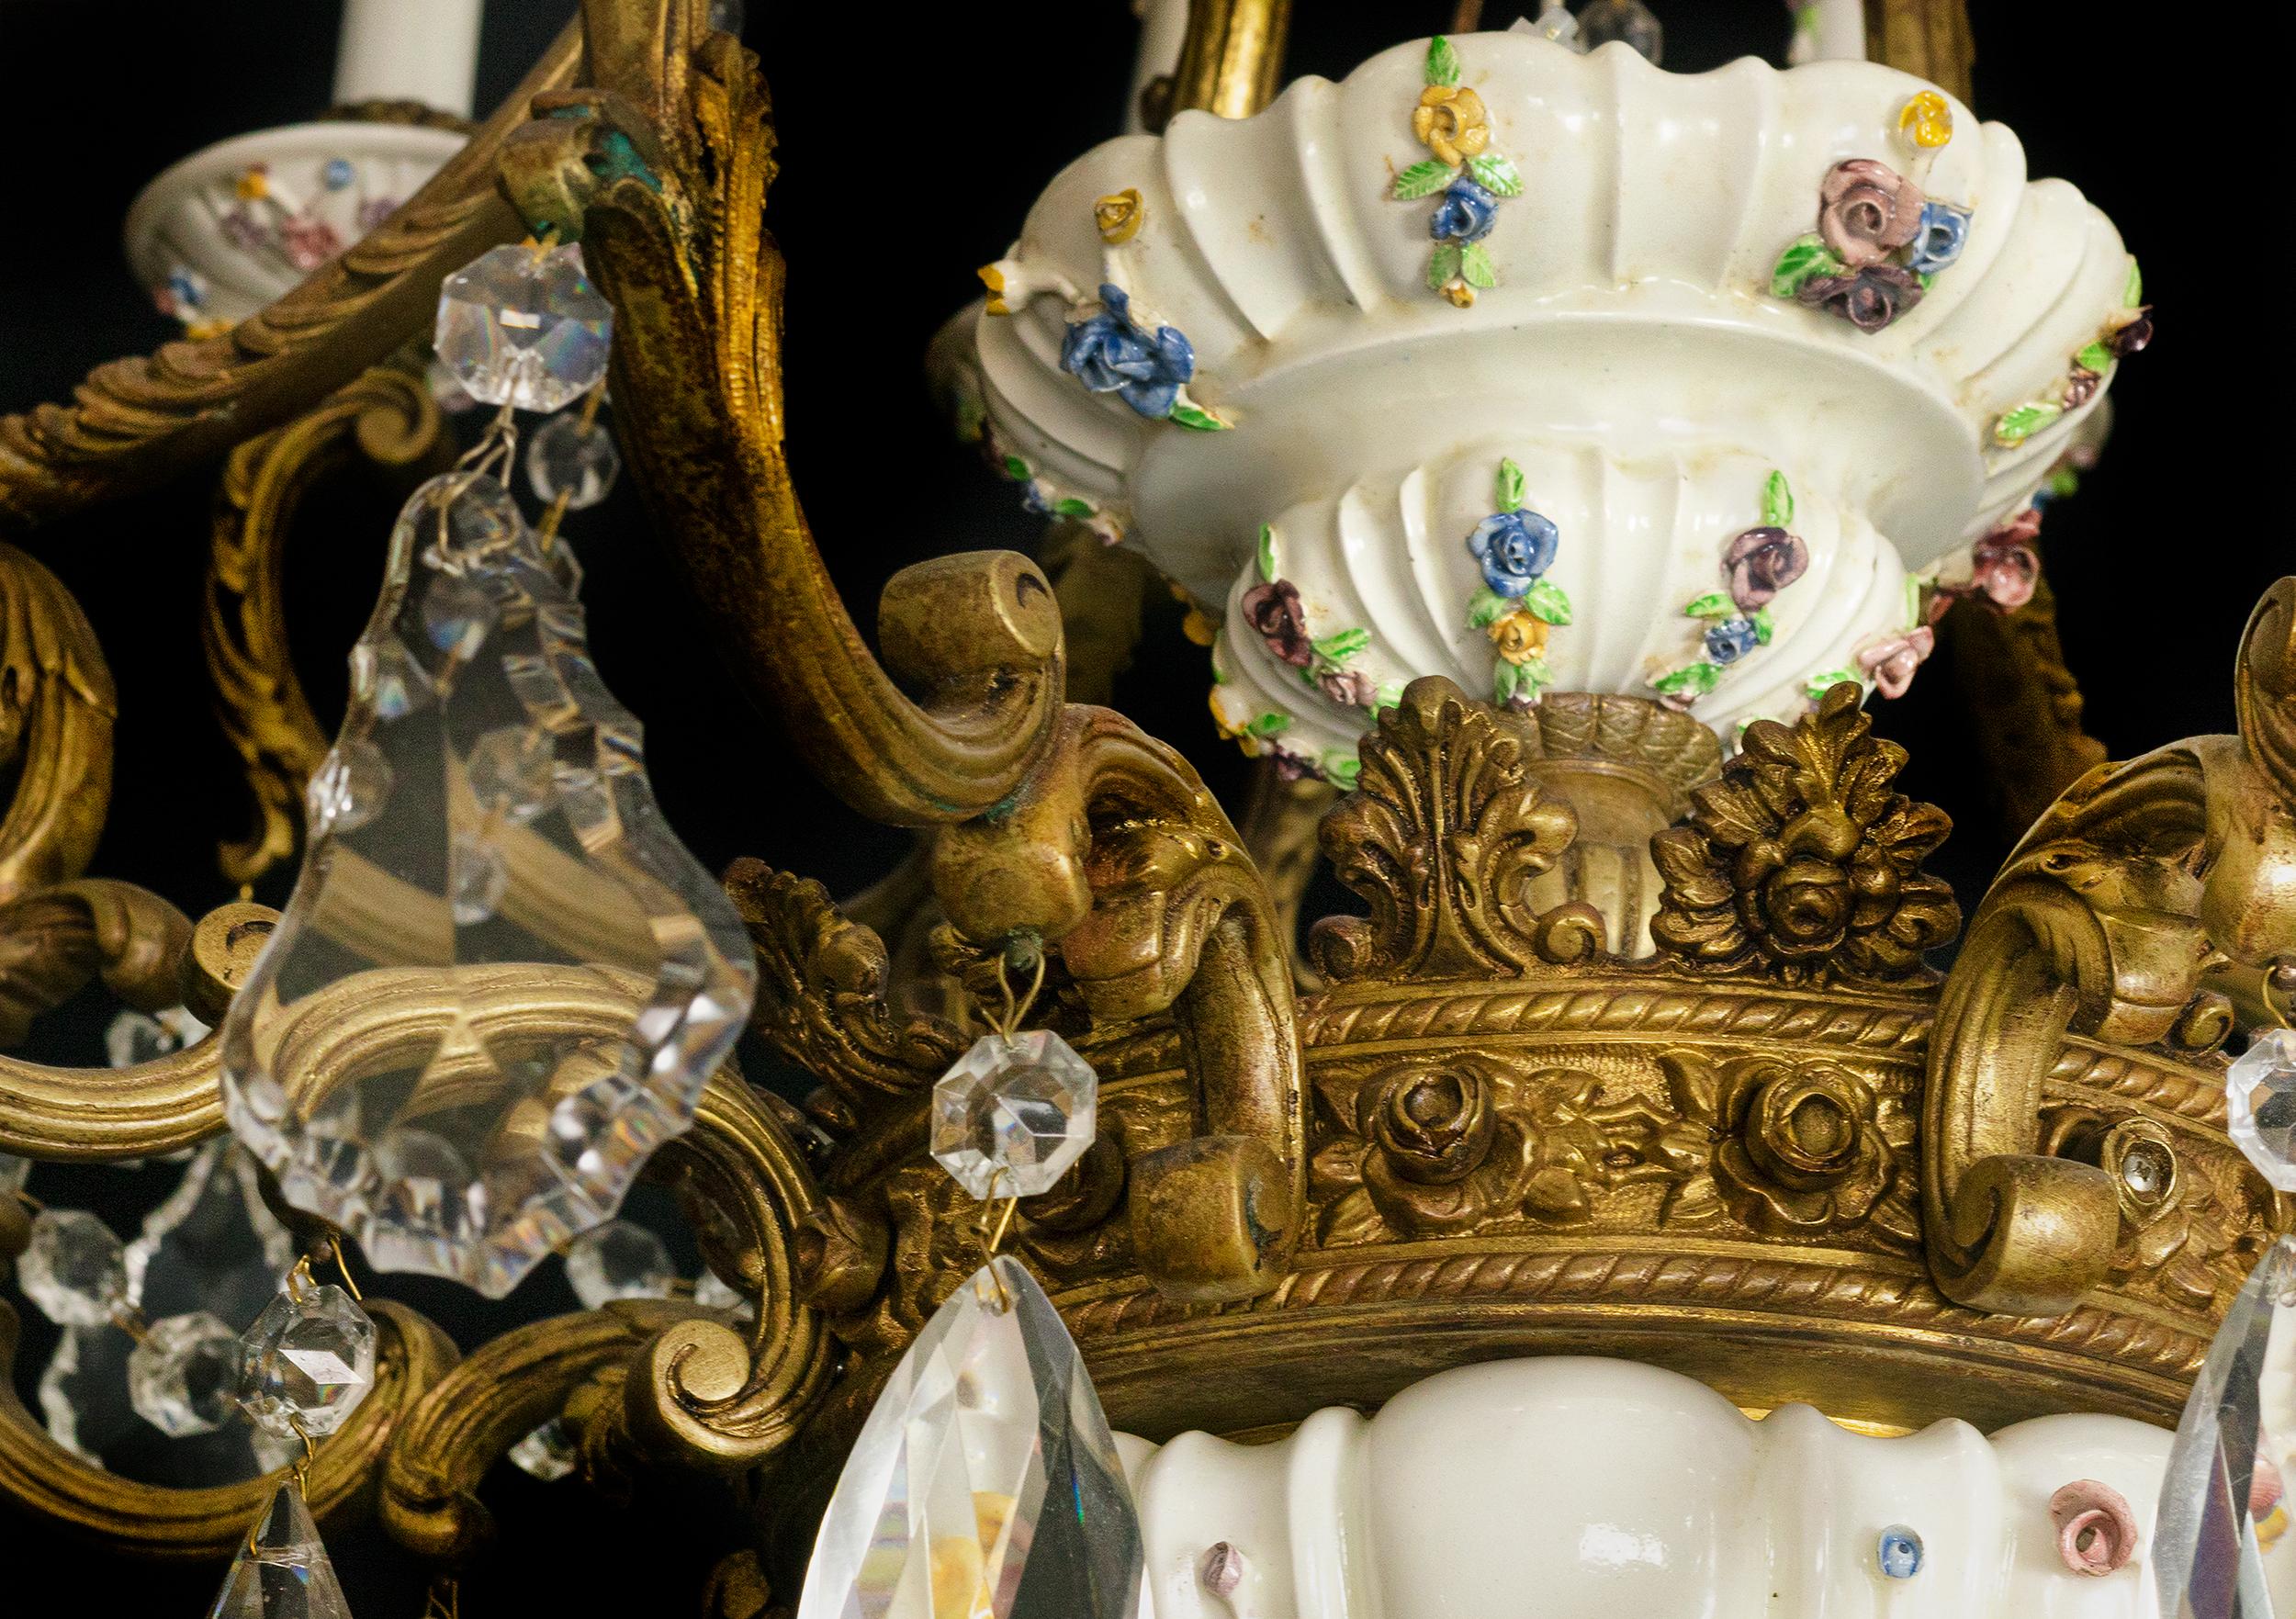 A Large 19th Century floral and vegetal decorated Chandelier with 16 golden bronze arms and hanging glass ornaments. 
Maissen porcelain and golden coloured arms.

Electric installation reviewed recently and working. 

Overall height: 135